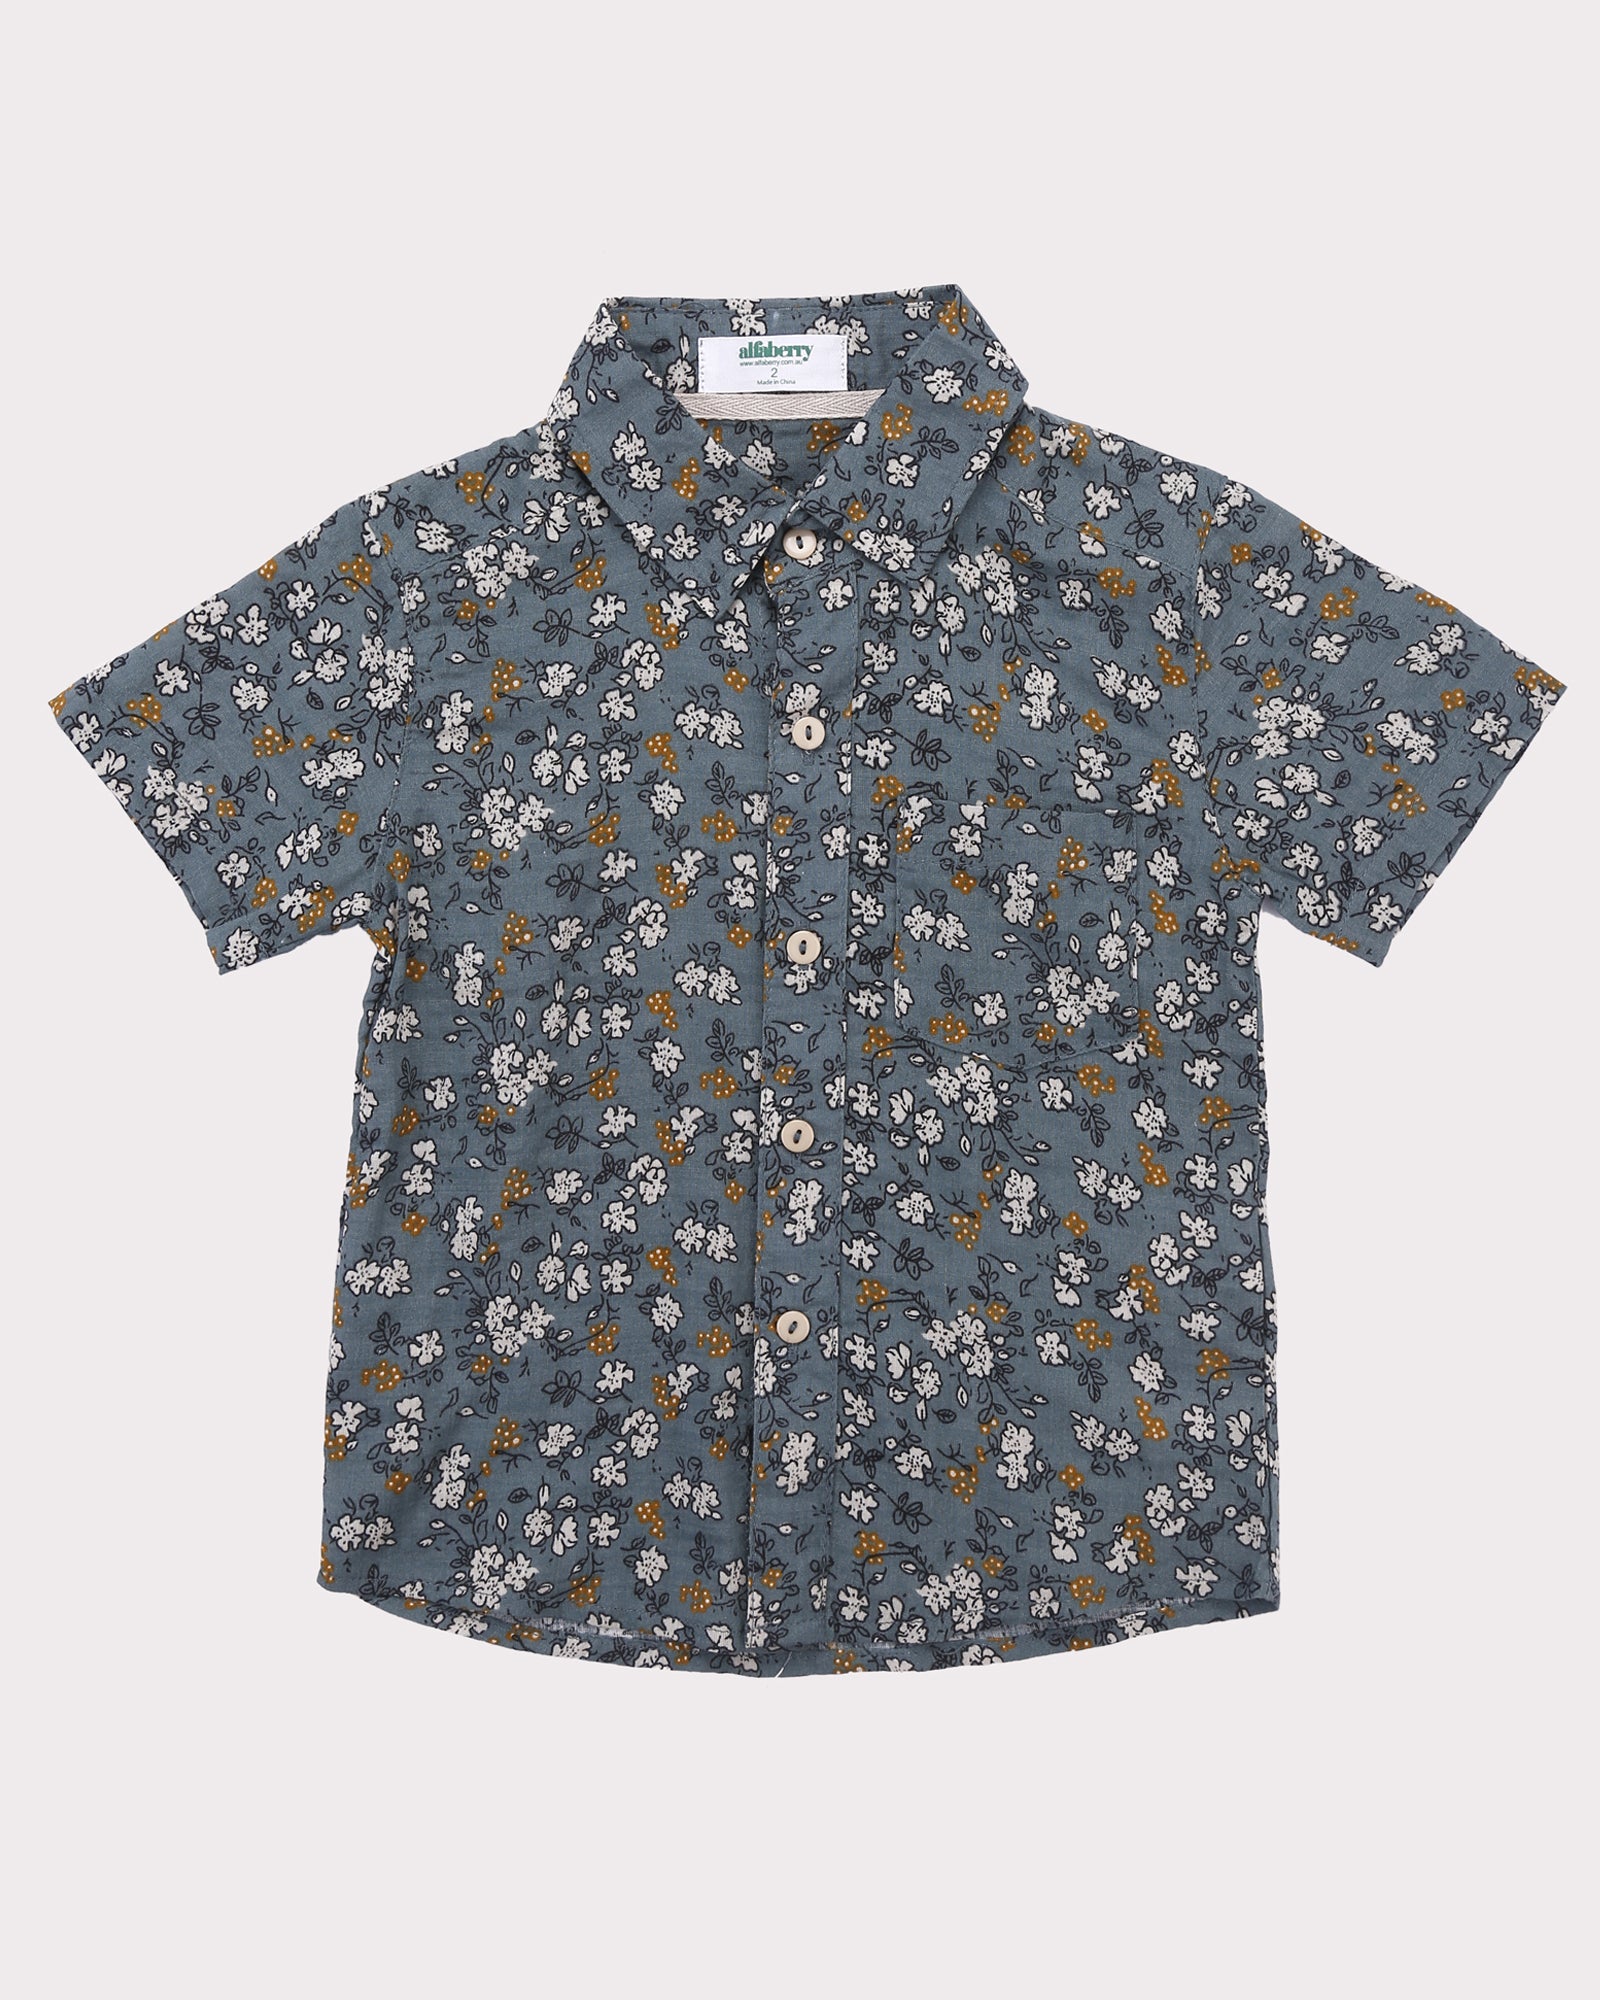 Clover Field Shirt in Teal front